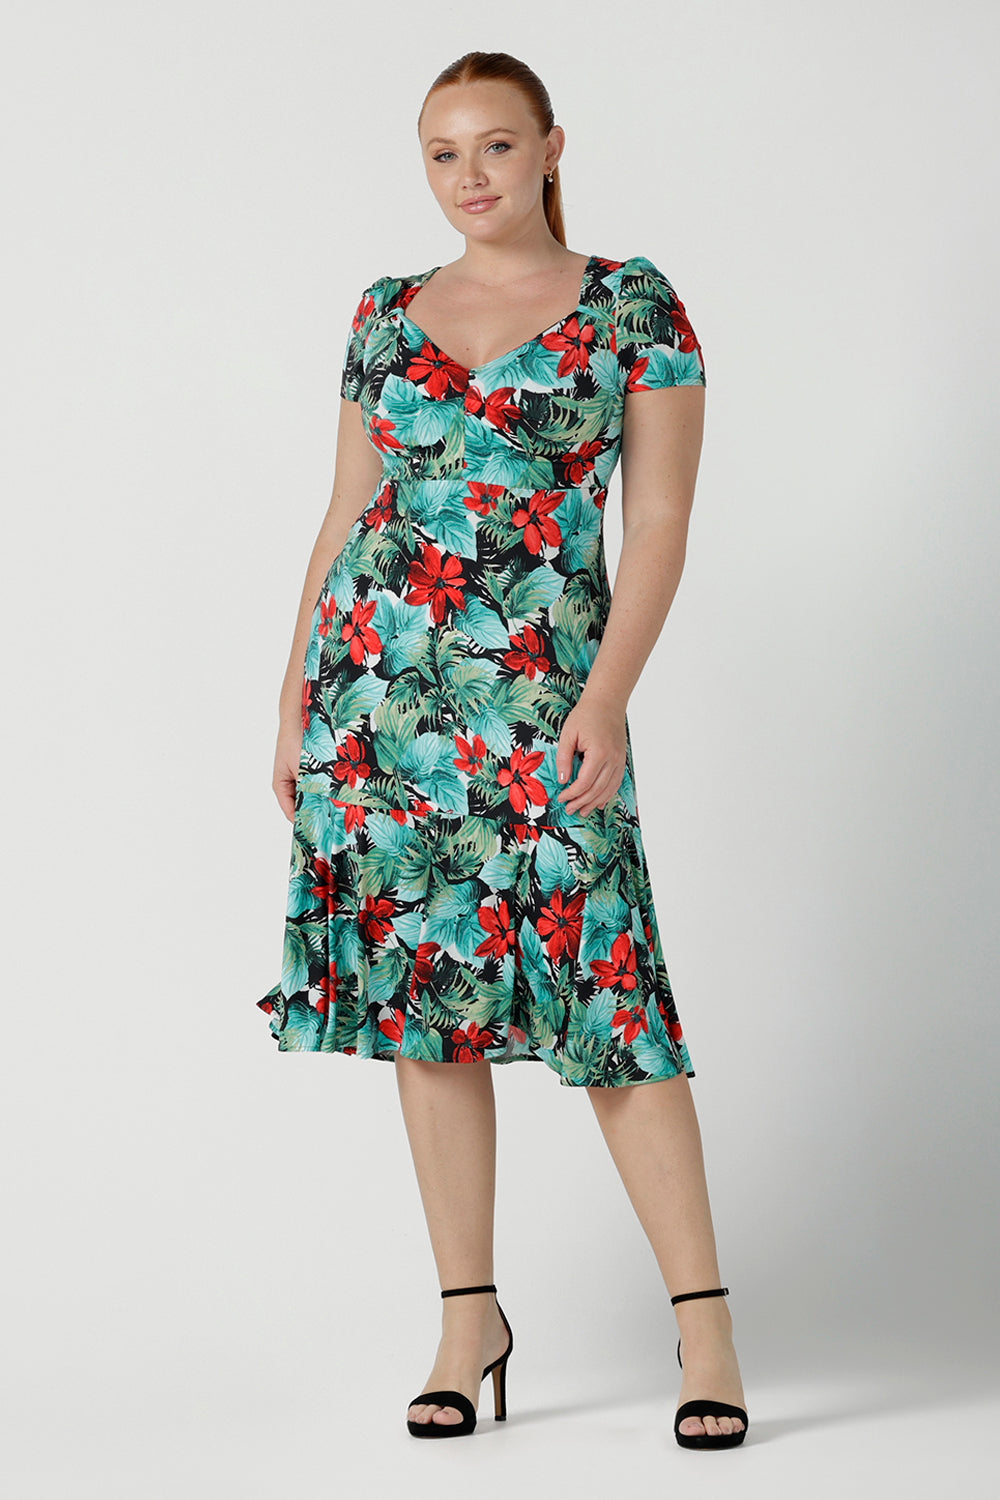 Size 12 woman wears the Jillian dress in Havana. A beautiful tropical print with a green leaf print and red flower on a white base that is tropical inspired. A sweetheart neckline style with an empire line. Tier on hem. Made in Australia for women. Size 8 - 24.